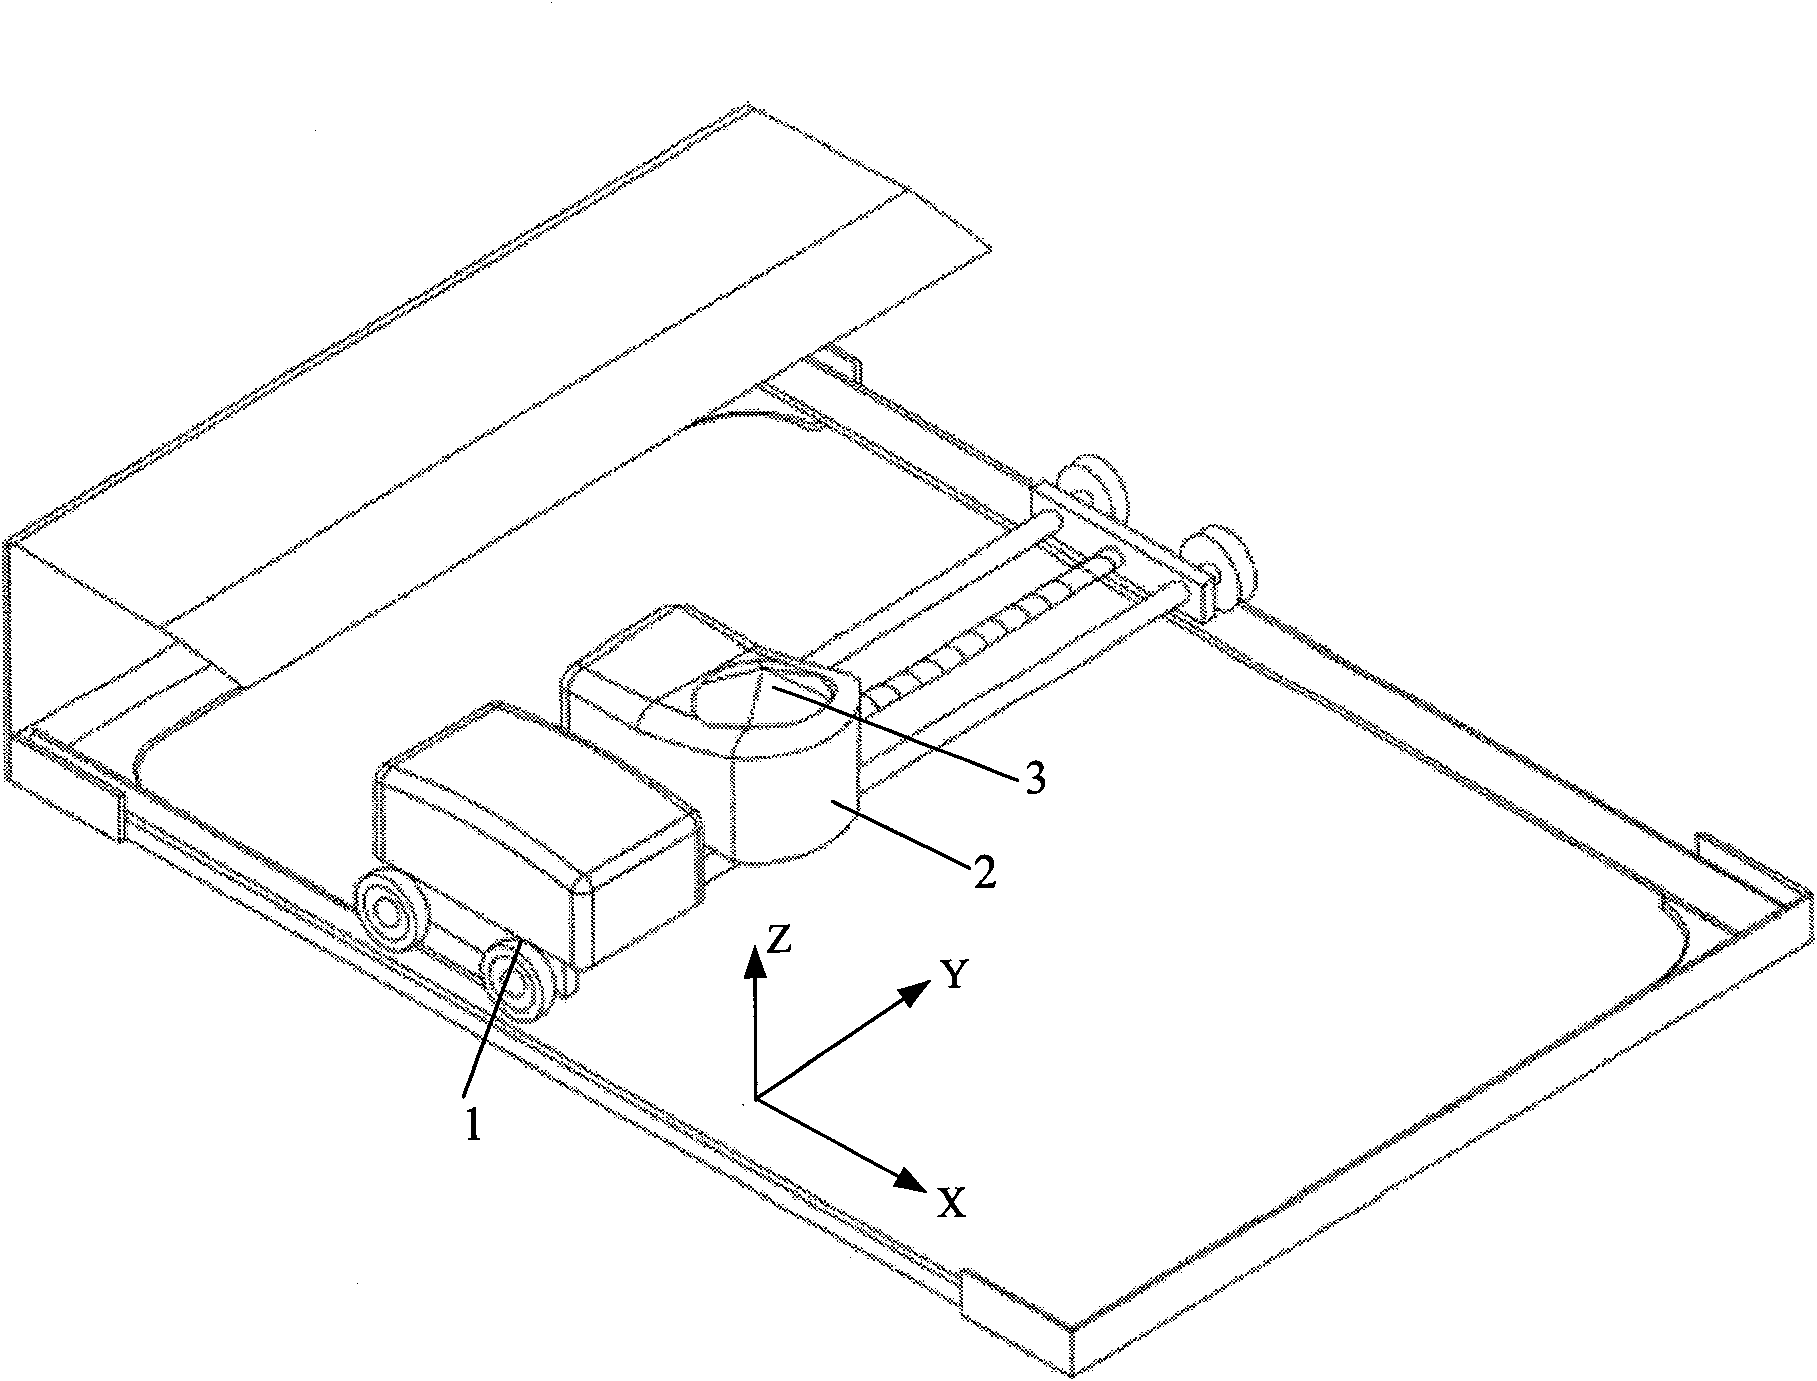 Automatic charging equipment for electric vehicle